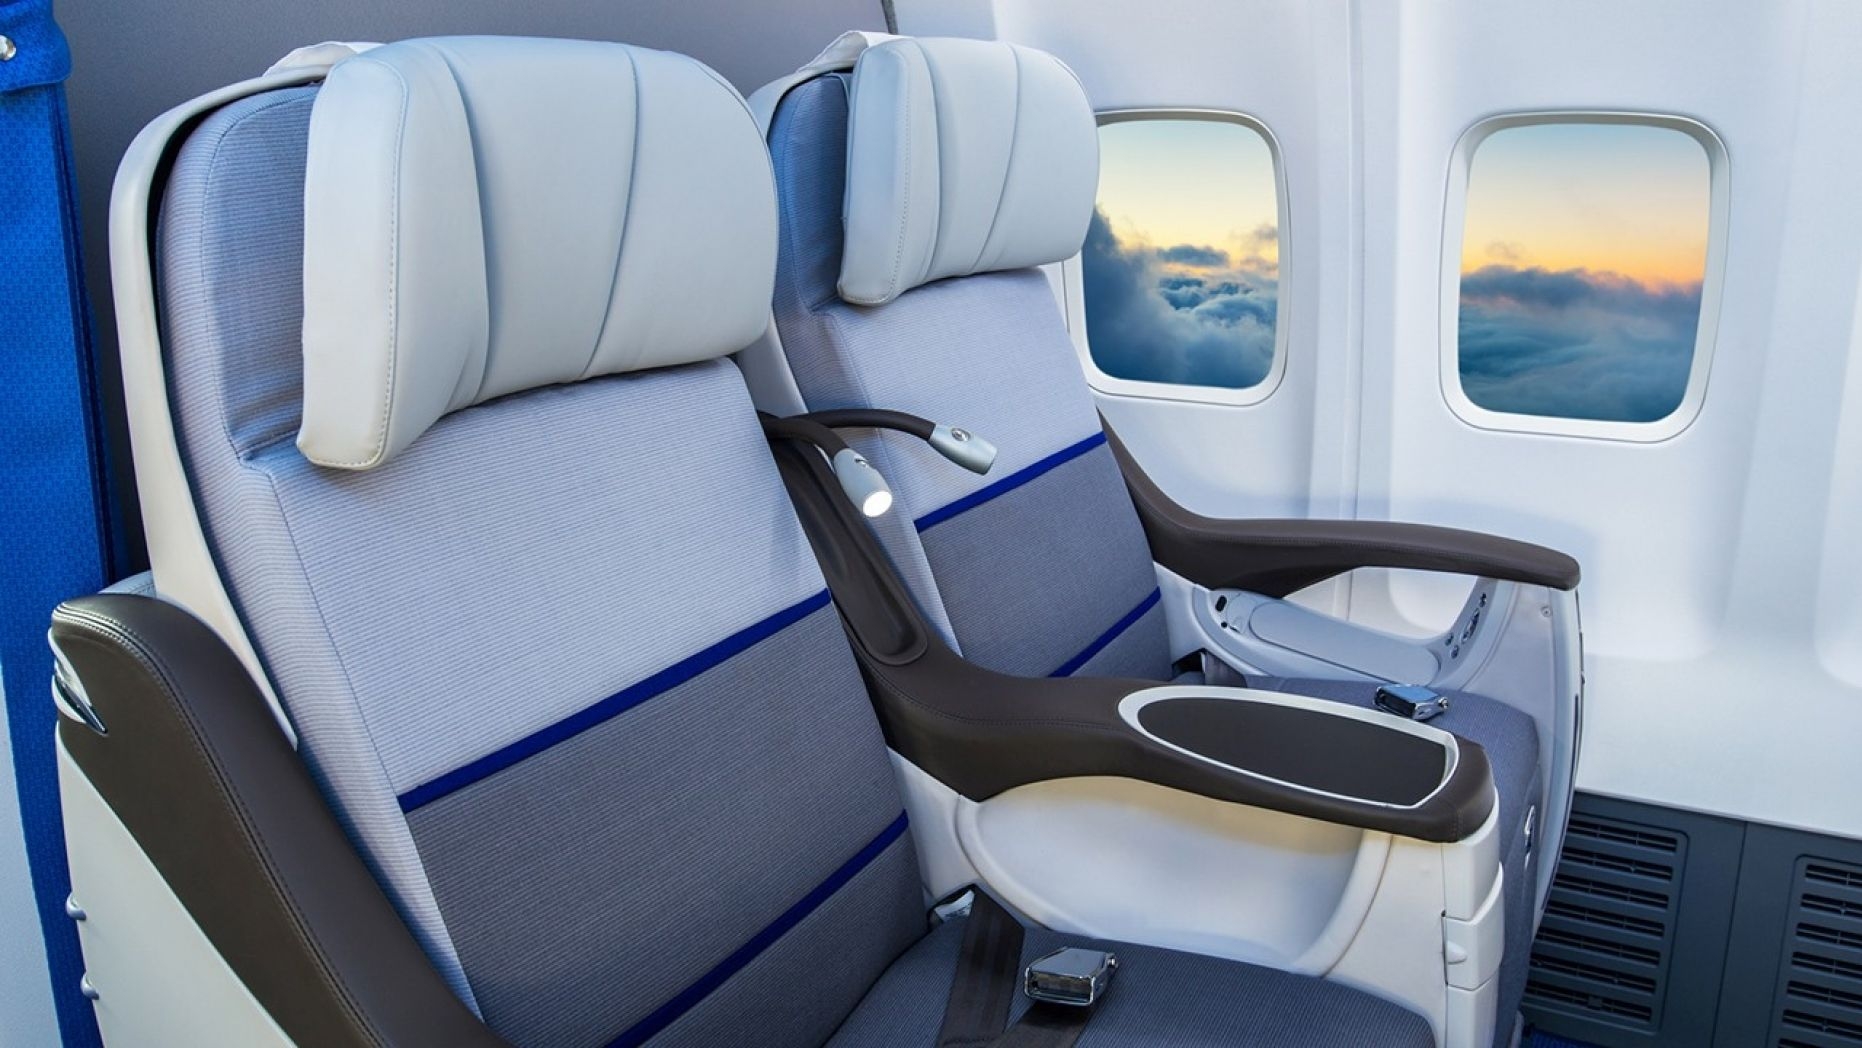 How to snag a better airline seat without paying too much more (if anything)